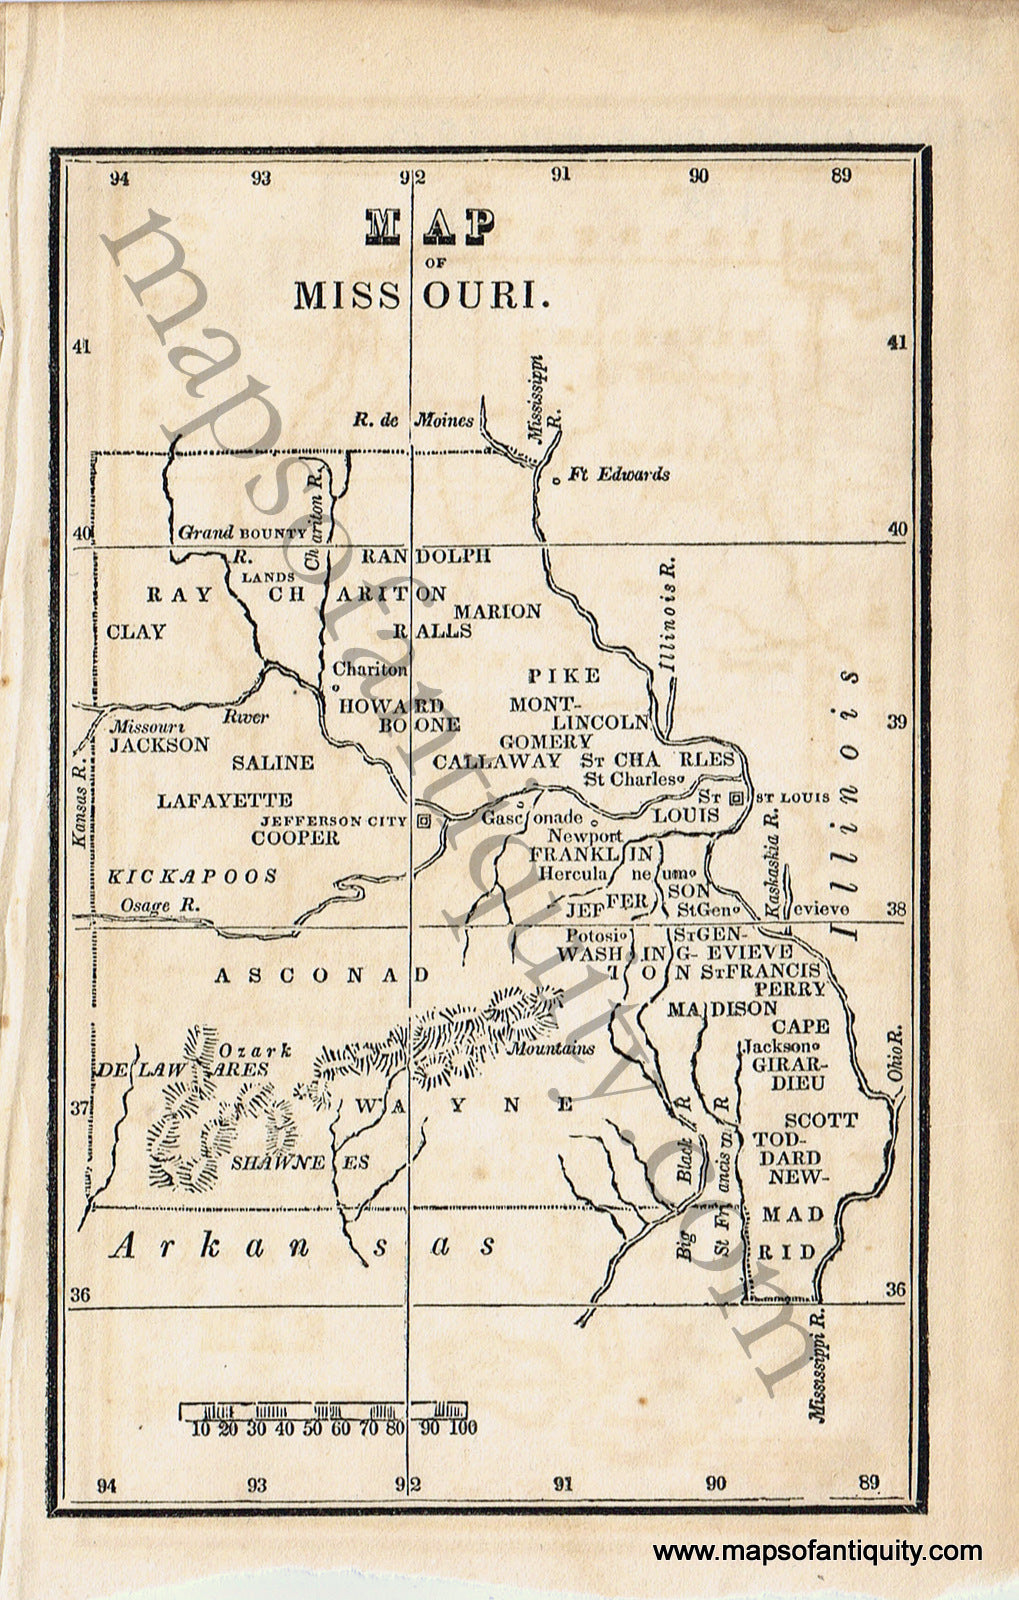 Antique-Black-and-White-Map-Map-of-Missouri-United-States-Midwest-1830-Boston-School-Geography-Maps-Of-Antiquity